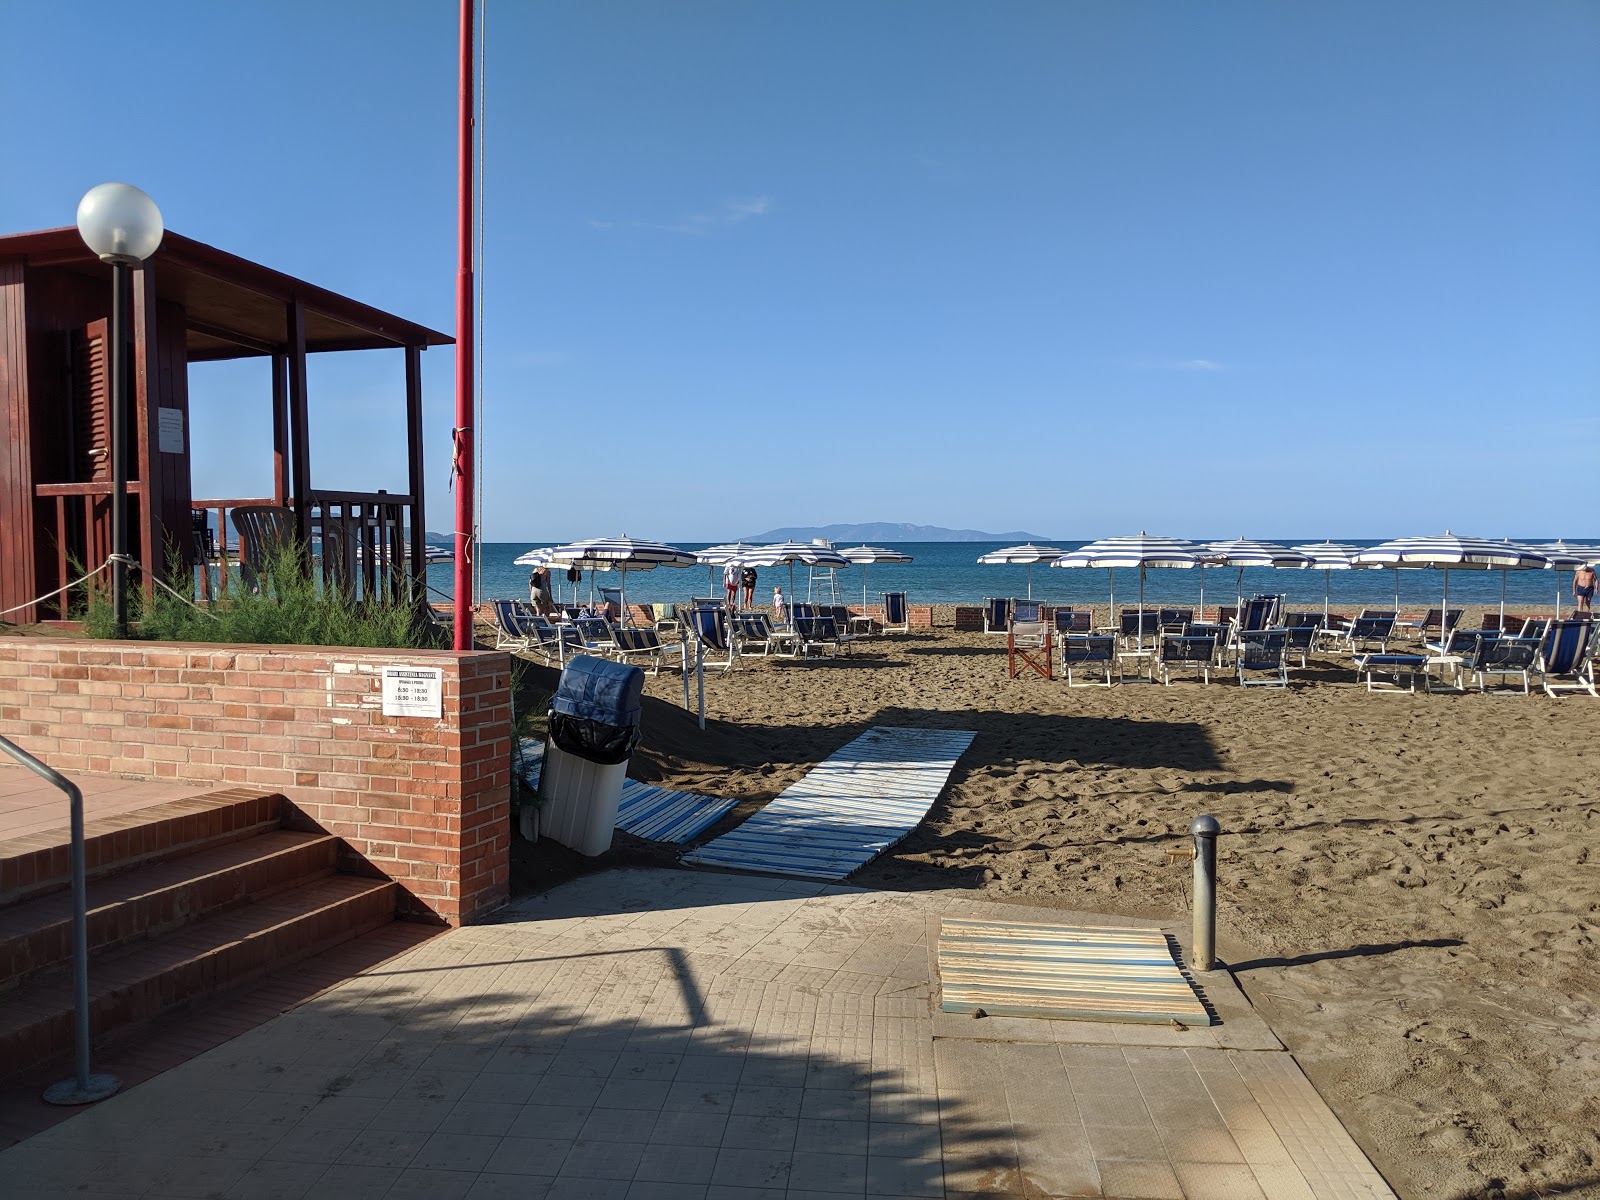 Photo of Spiaggia Dell'Osa - popular place among relax connoisseurs